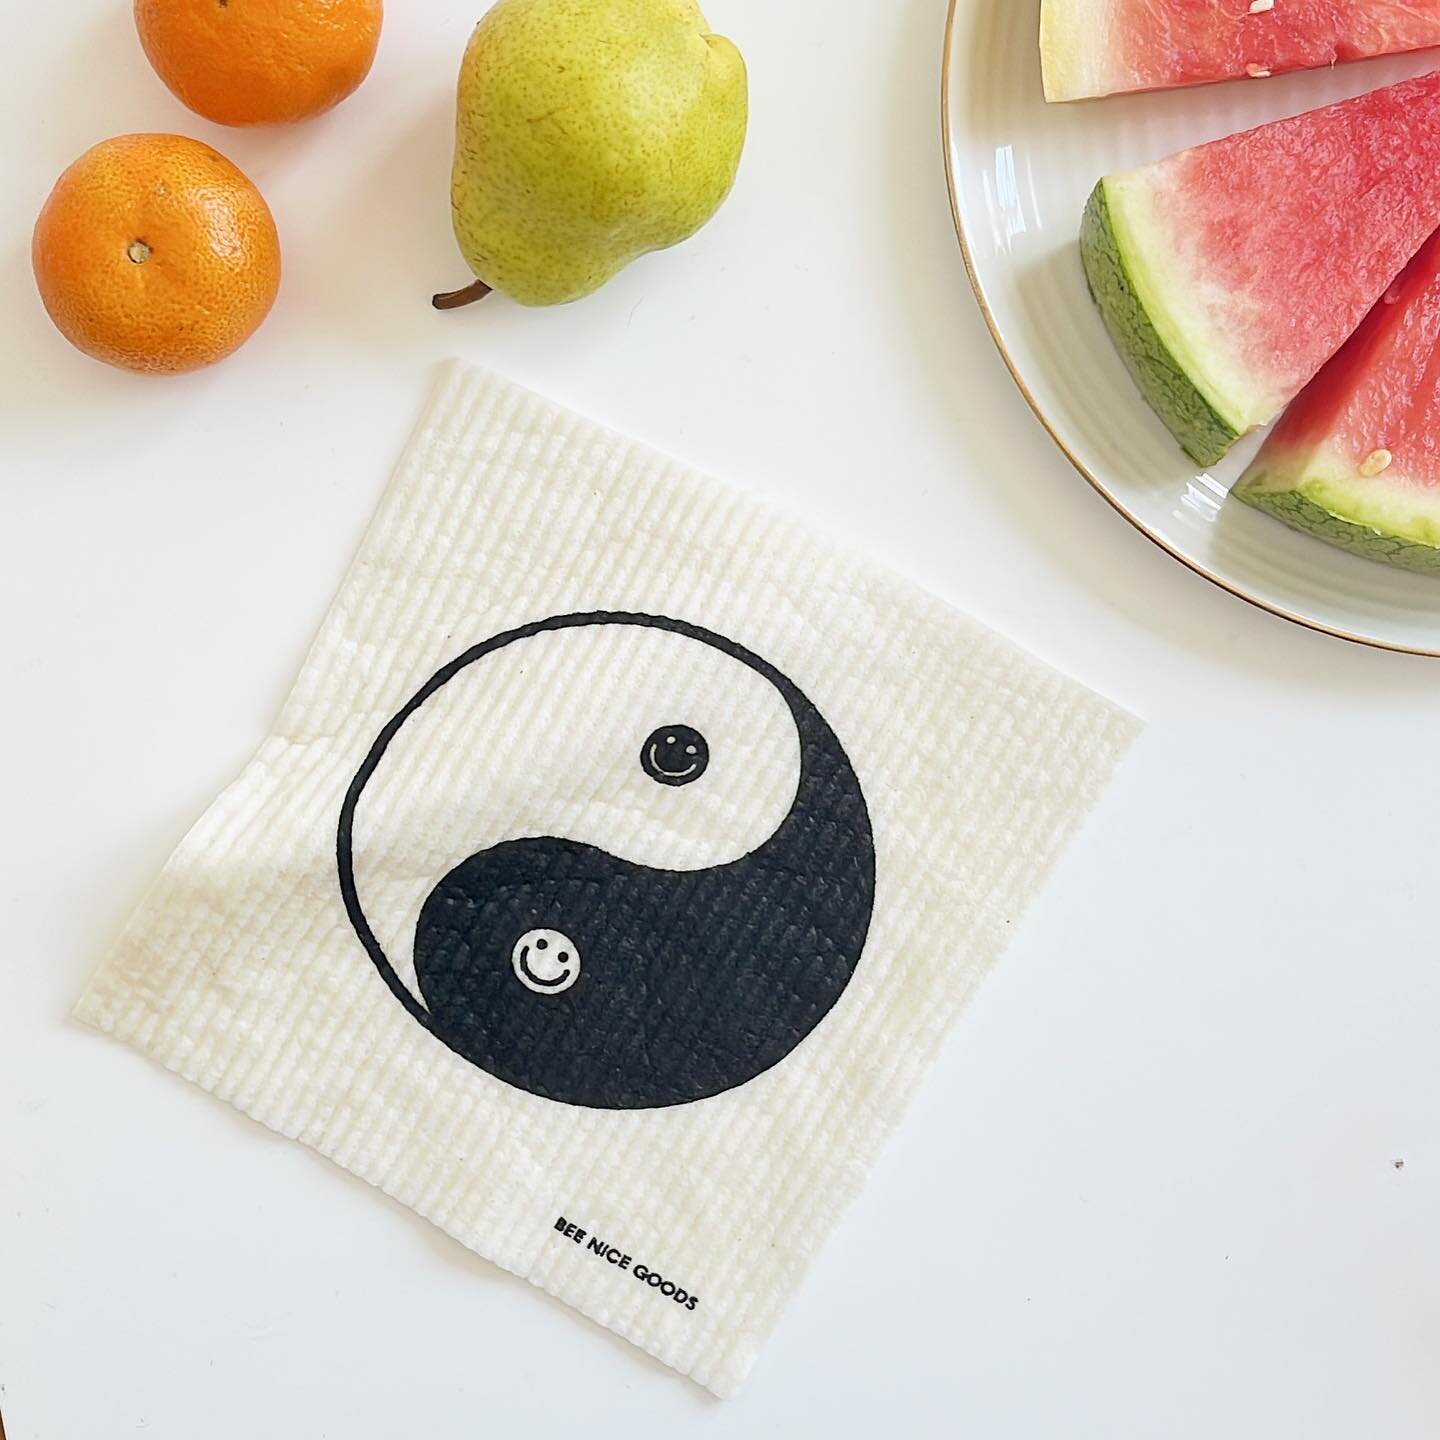 Clean up any mess in style with our Swedish sponge cloths?  Looking to replace paper towel to soak up spills?  Check out our adorable prints!
.
.
.
.
.
#sweden #yinyang #eco #ecofriendly #biodegradable #greenliving #green #cool #pretty #instadaily #b